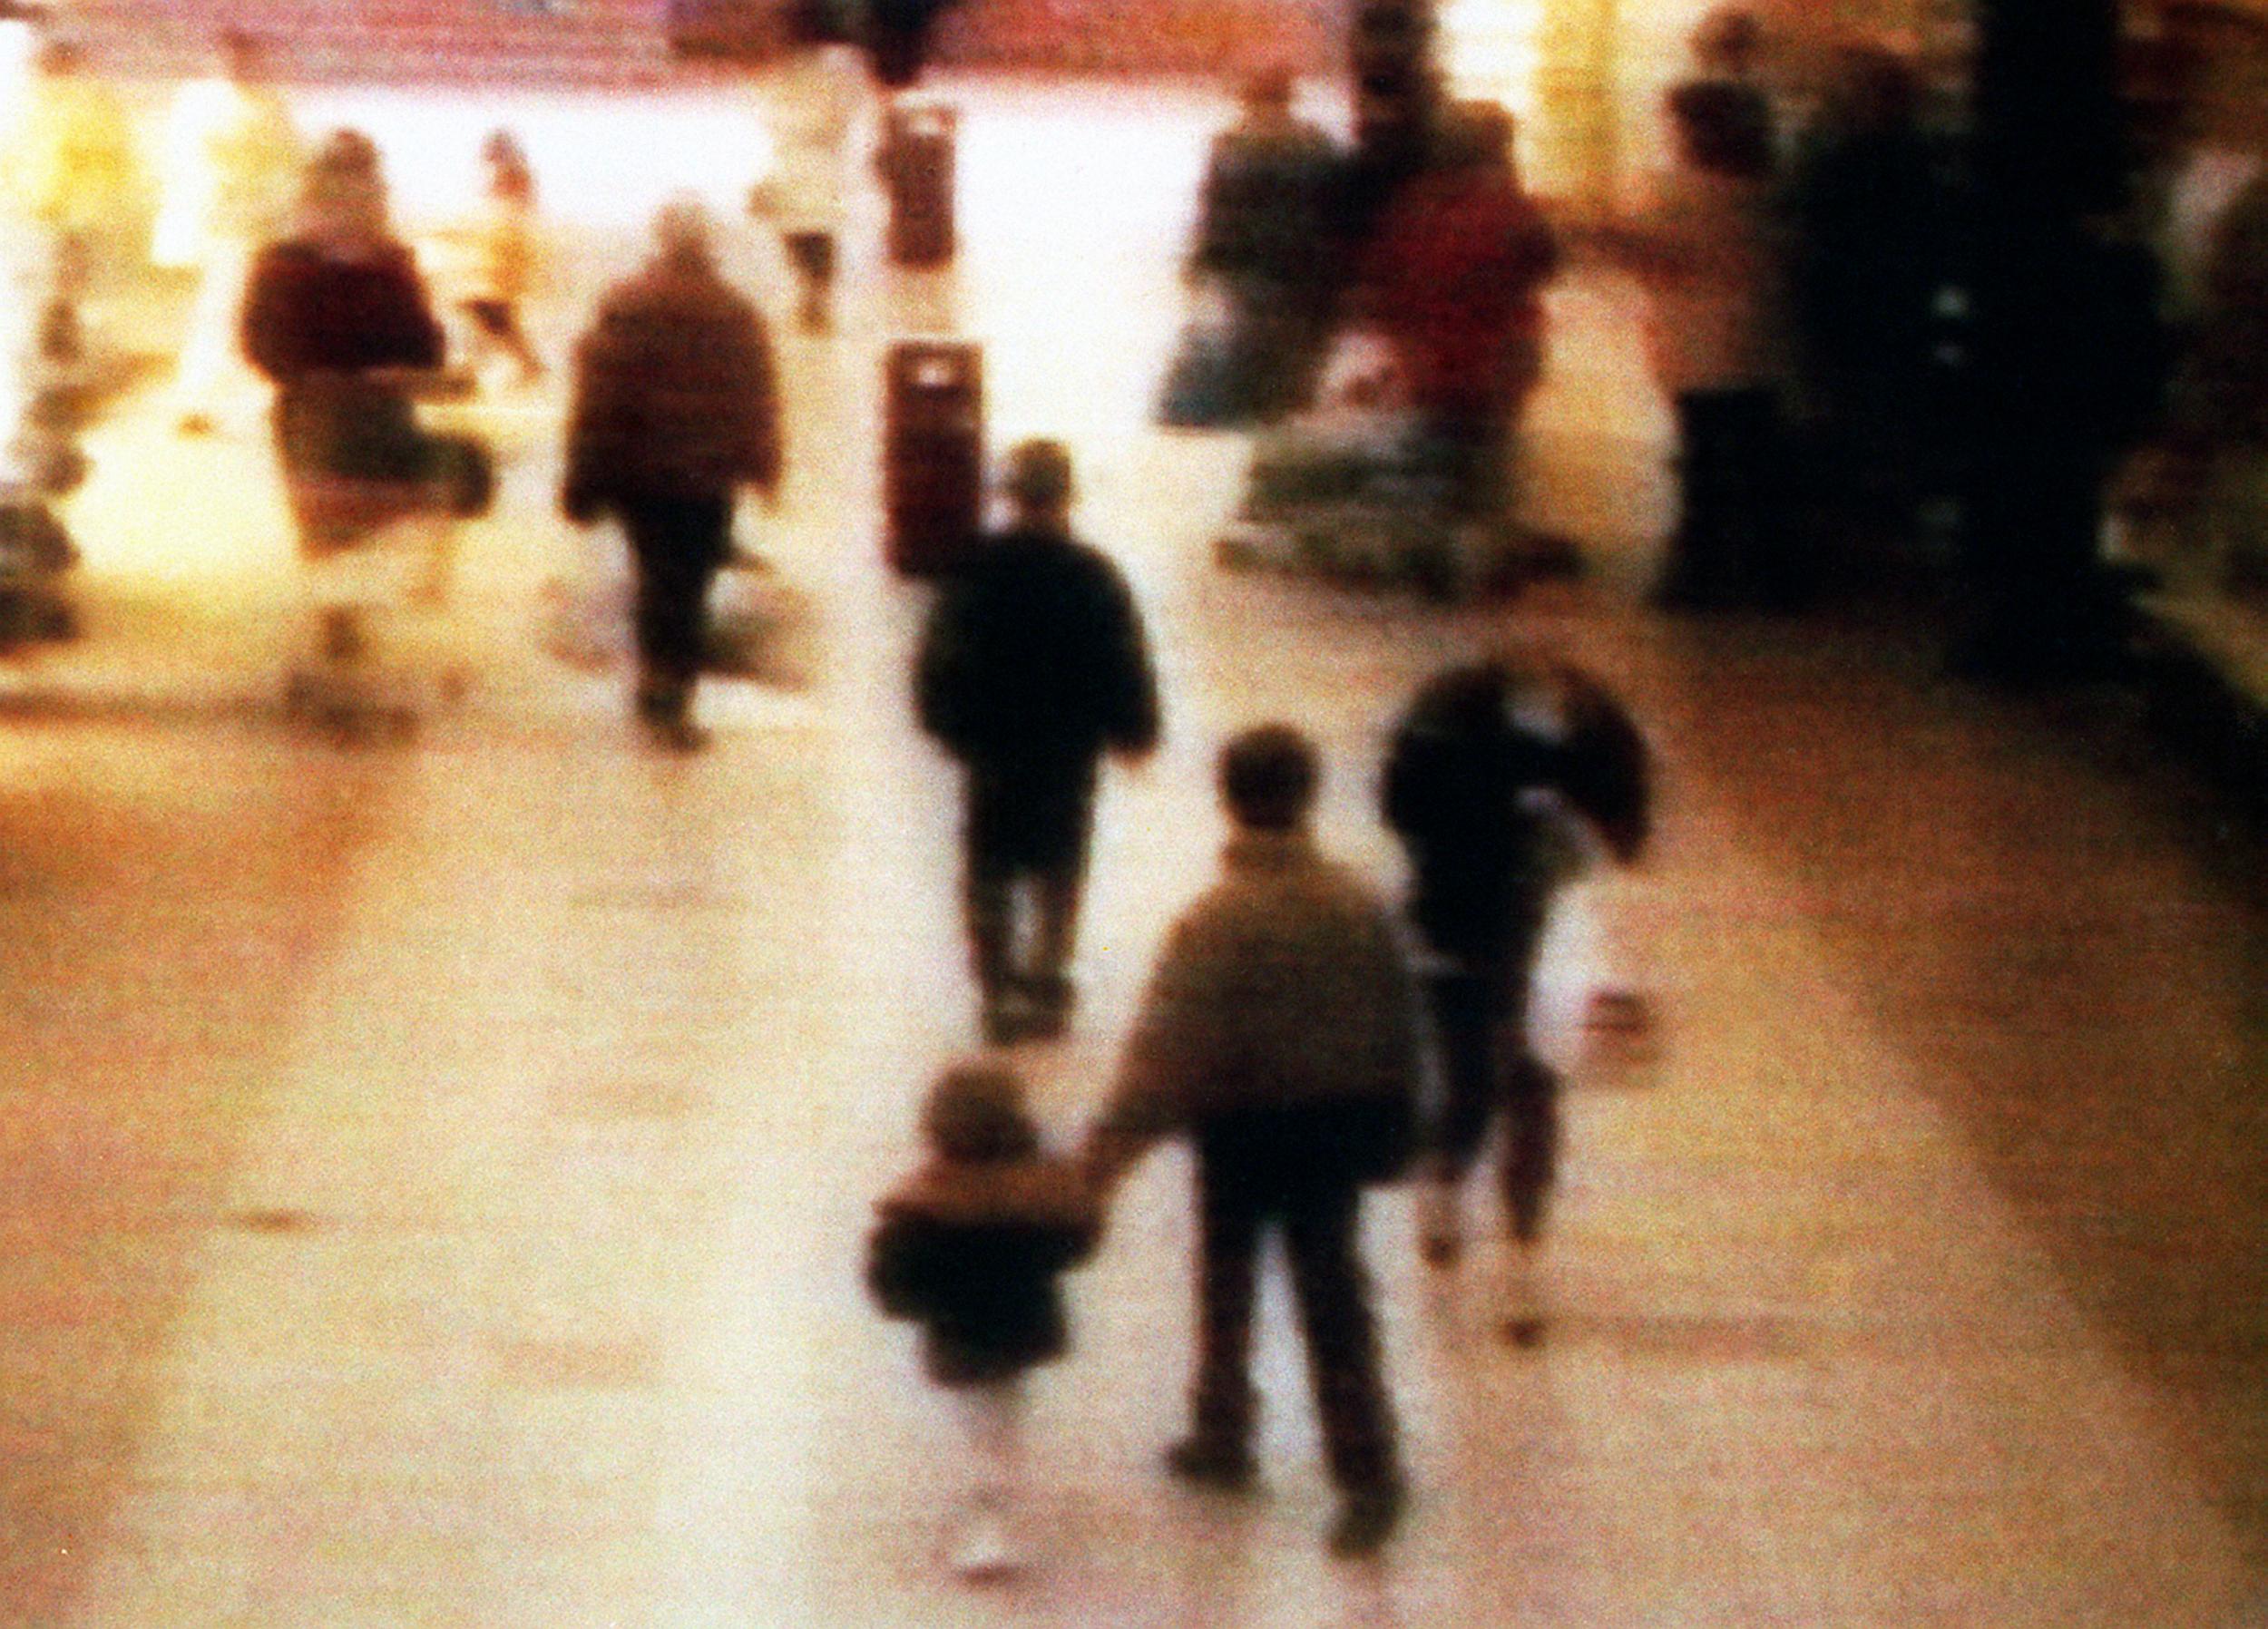 A video still of James Bulger, aged 2 years old, being led away in the 'New Strand' shopping centre